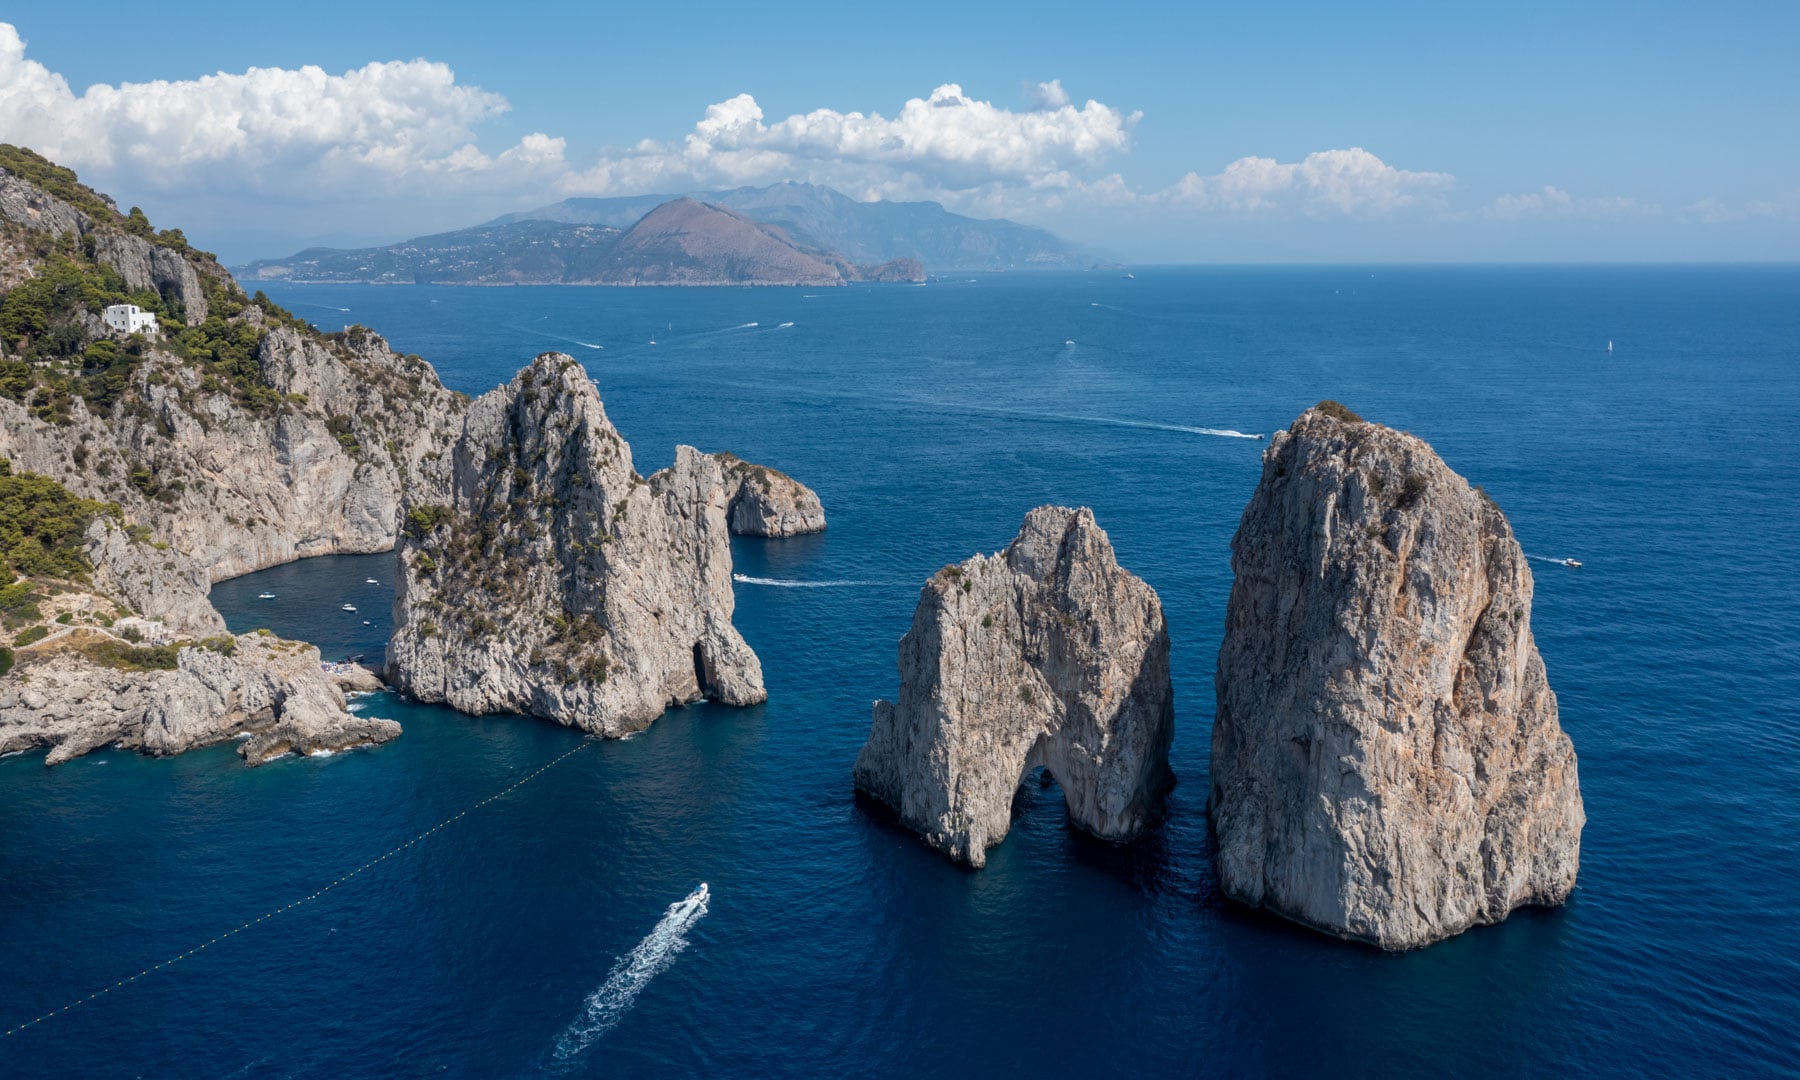 23 Best Things To Do In Capri, Italy (+Tips from an Italian)